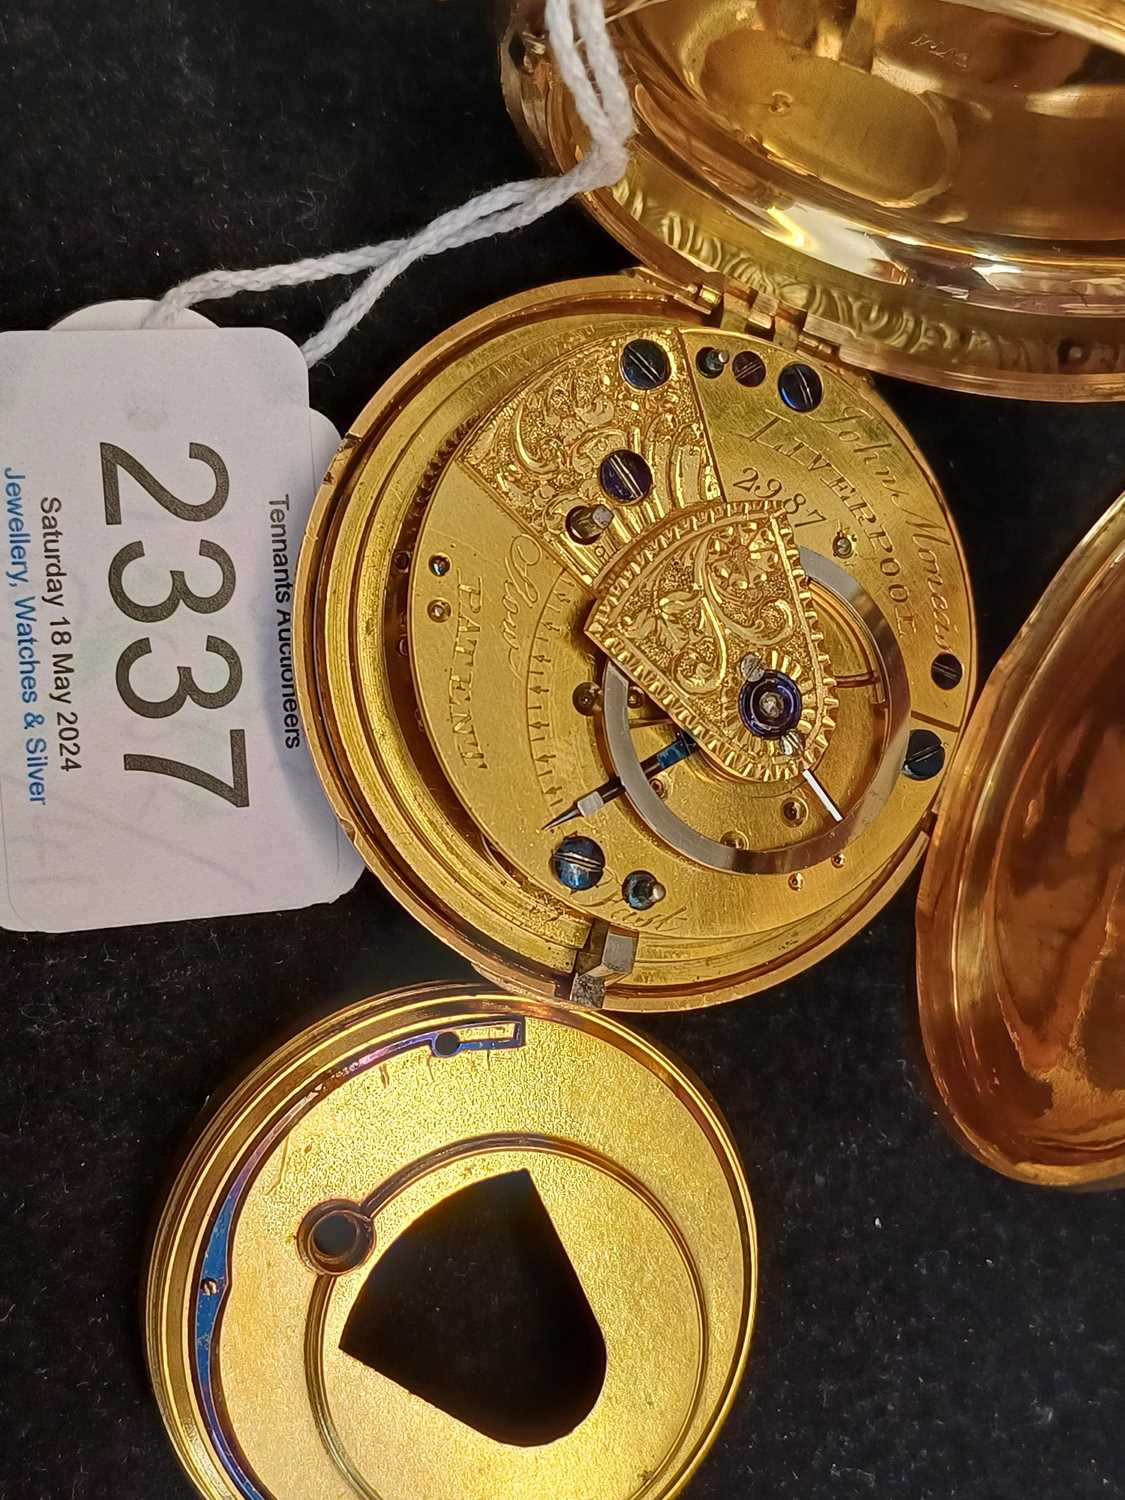 Moncas: An 18 Carat Gold Full Hunter Pocket Watch, signed John Moncas, Liverpool, 1823, single fusee - Image 3 of 3